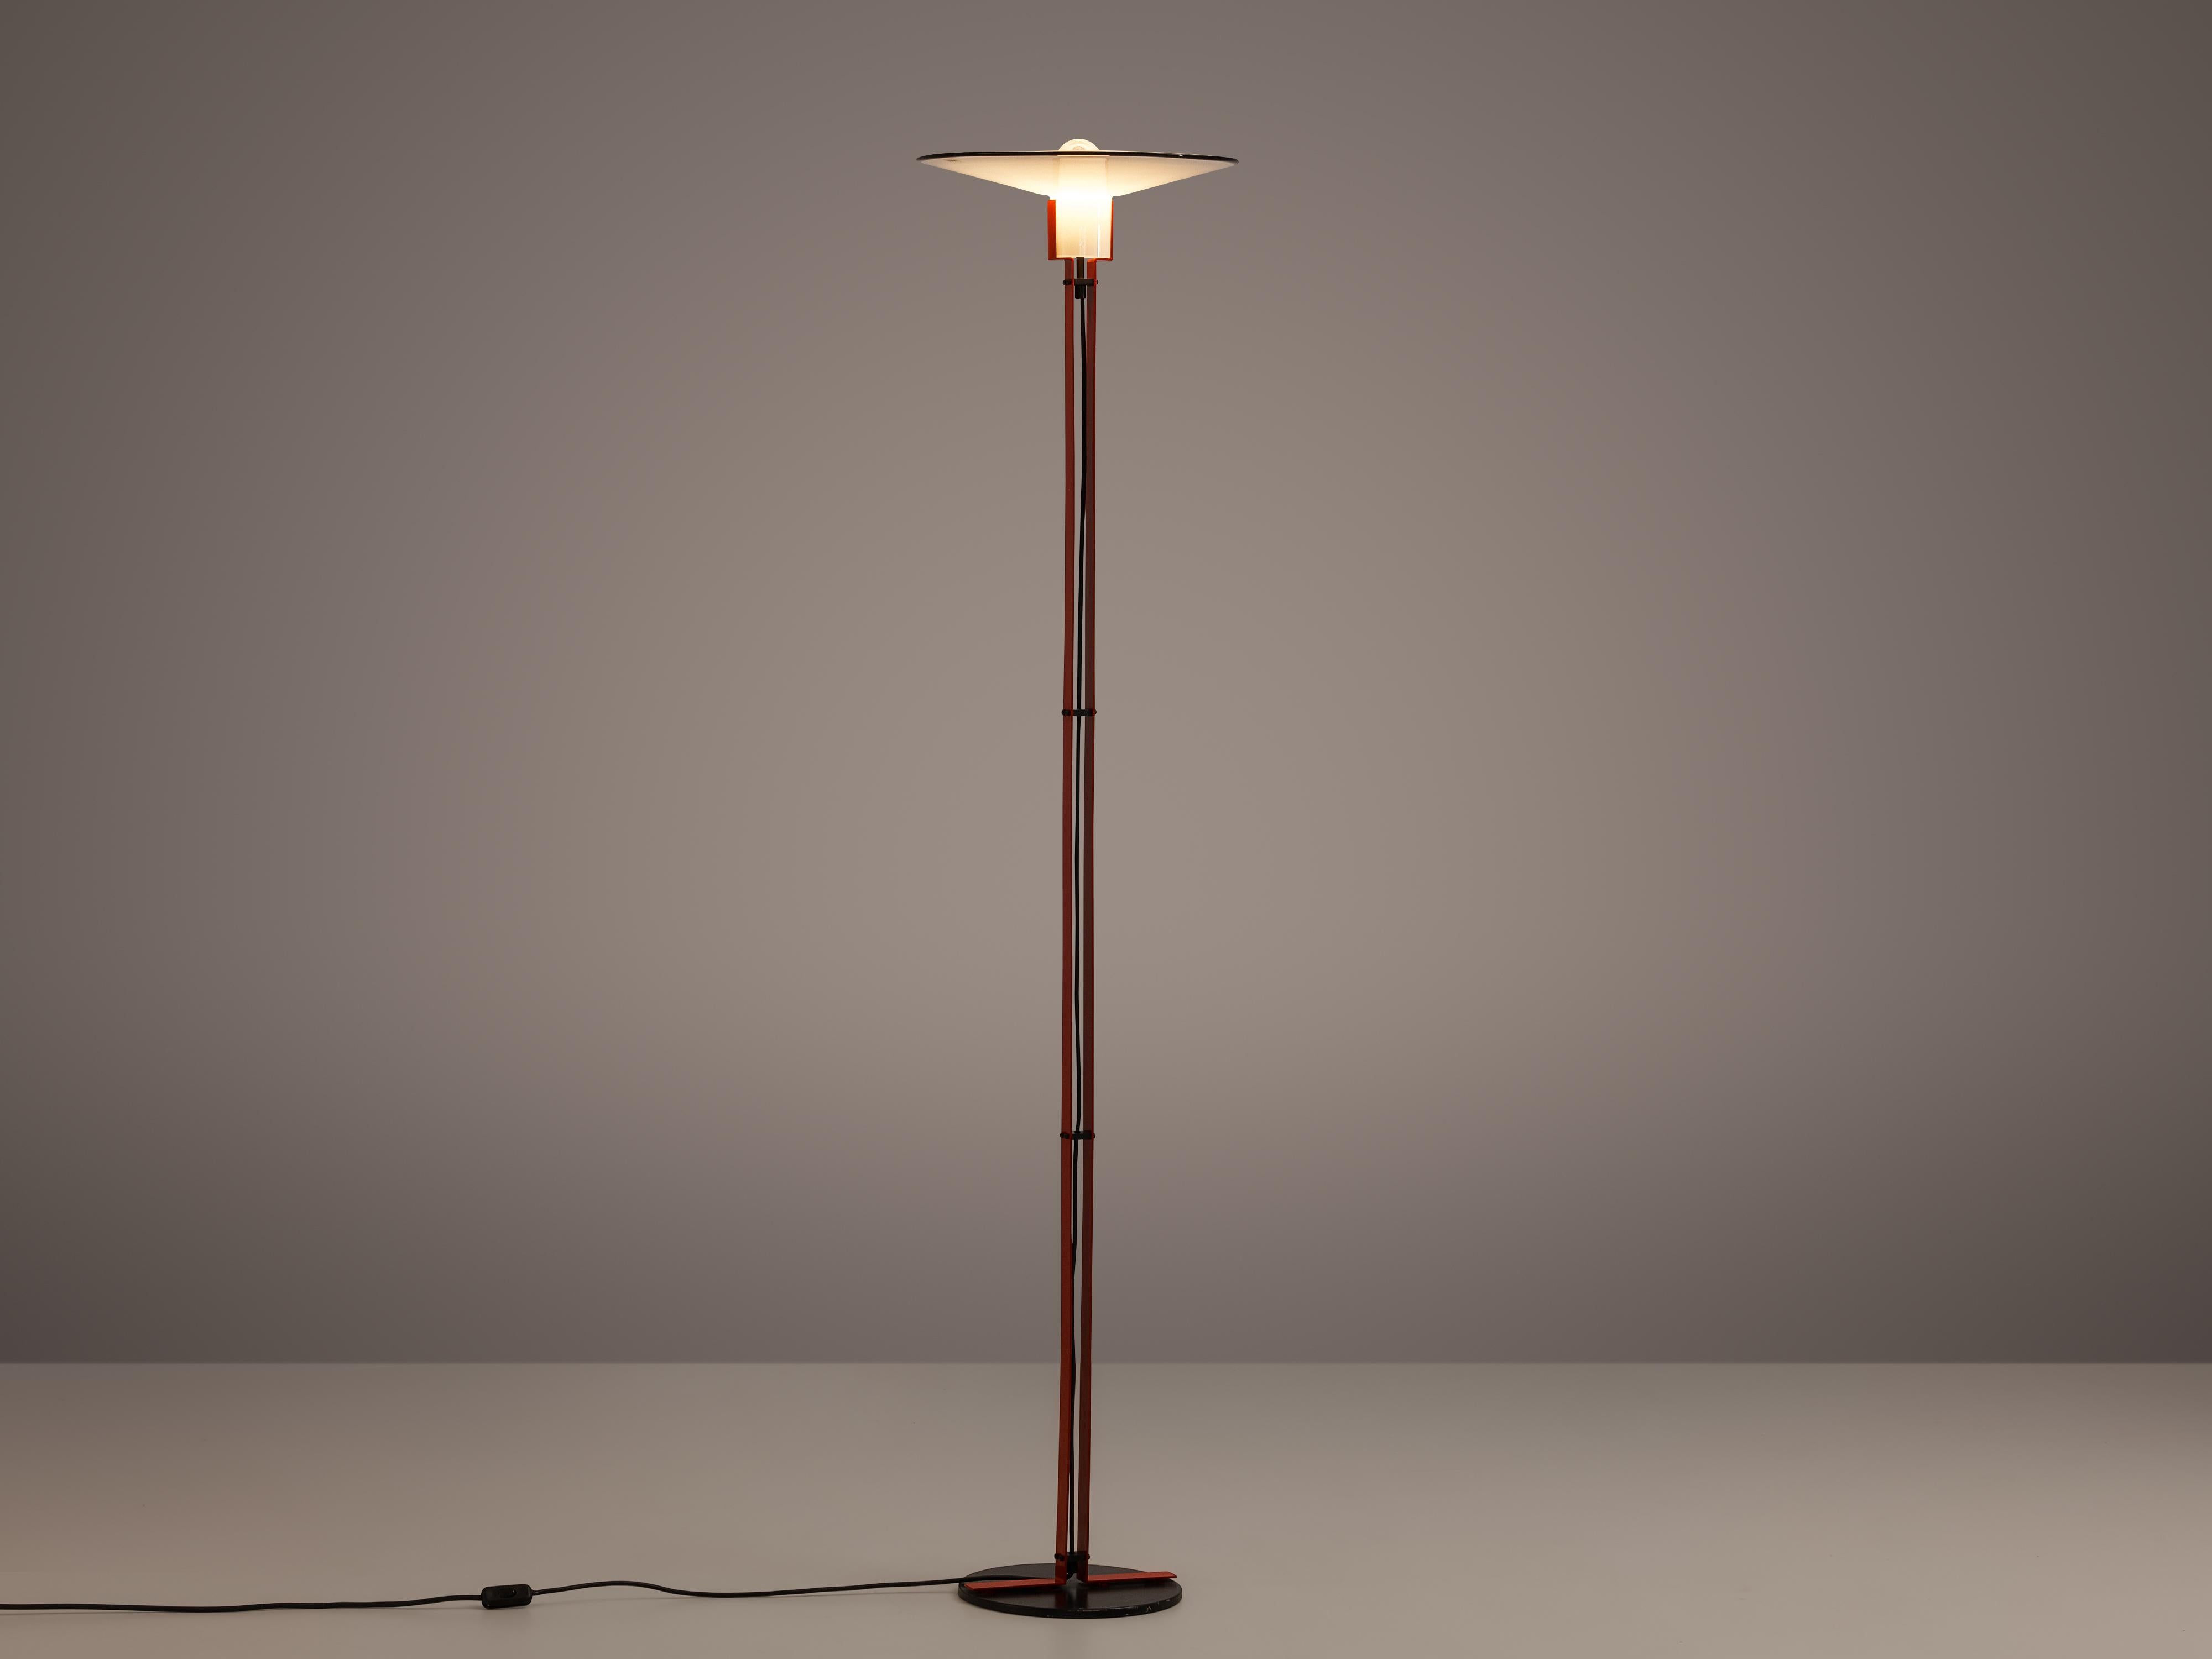 VeArt, floor lamp, metal, glass, Italy, 1970s

This elegant floor lamp by Italian manufacturer VeArt shows lovely details. From a round base two flat stems rise upwards, holding the cable in their middle. On top rests the shade that opens towards